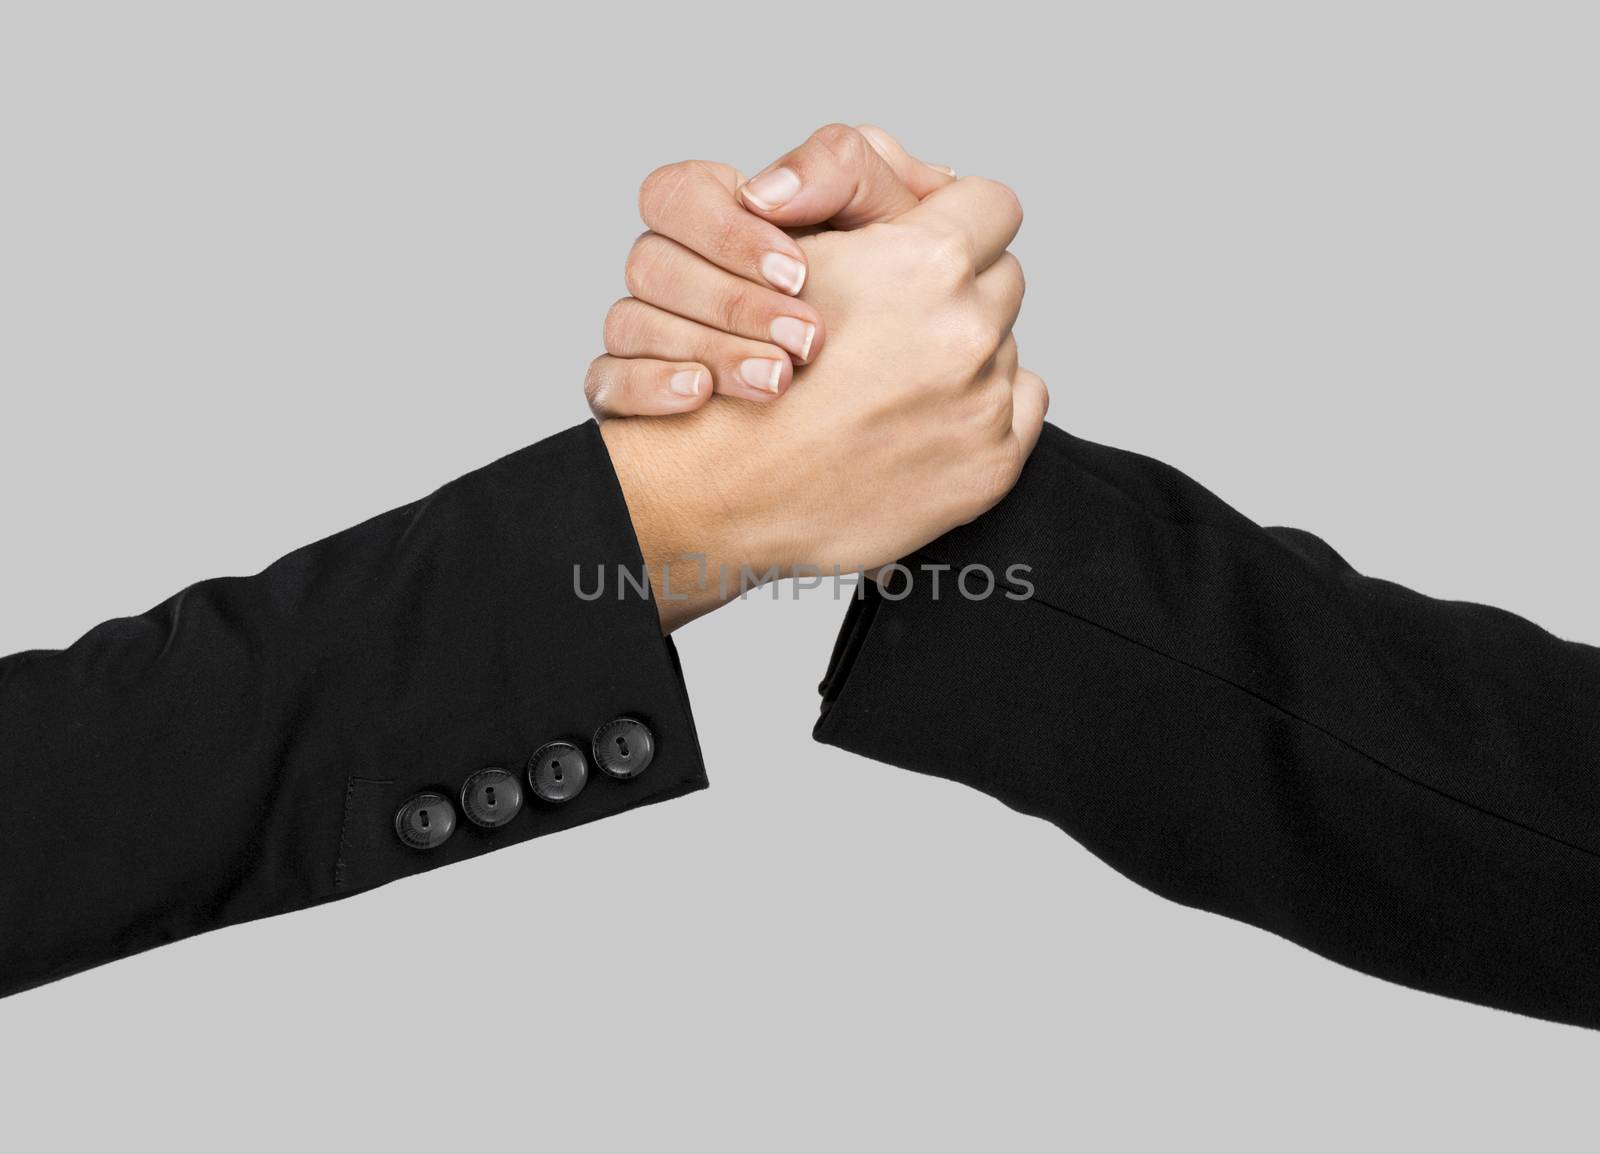 Greeting hands over a gray background